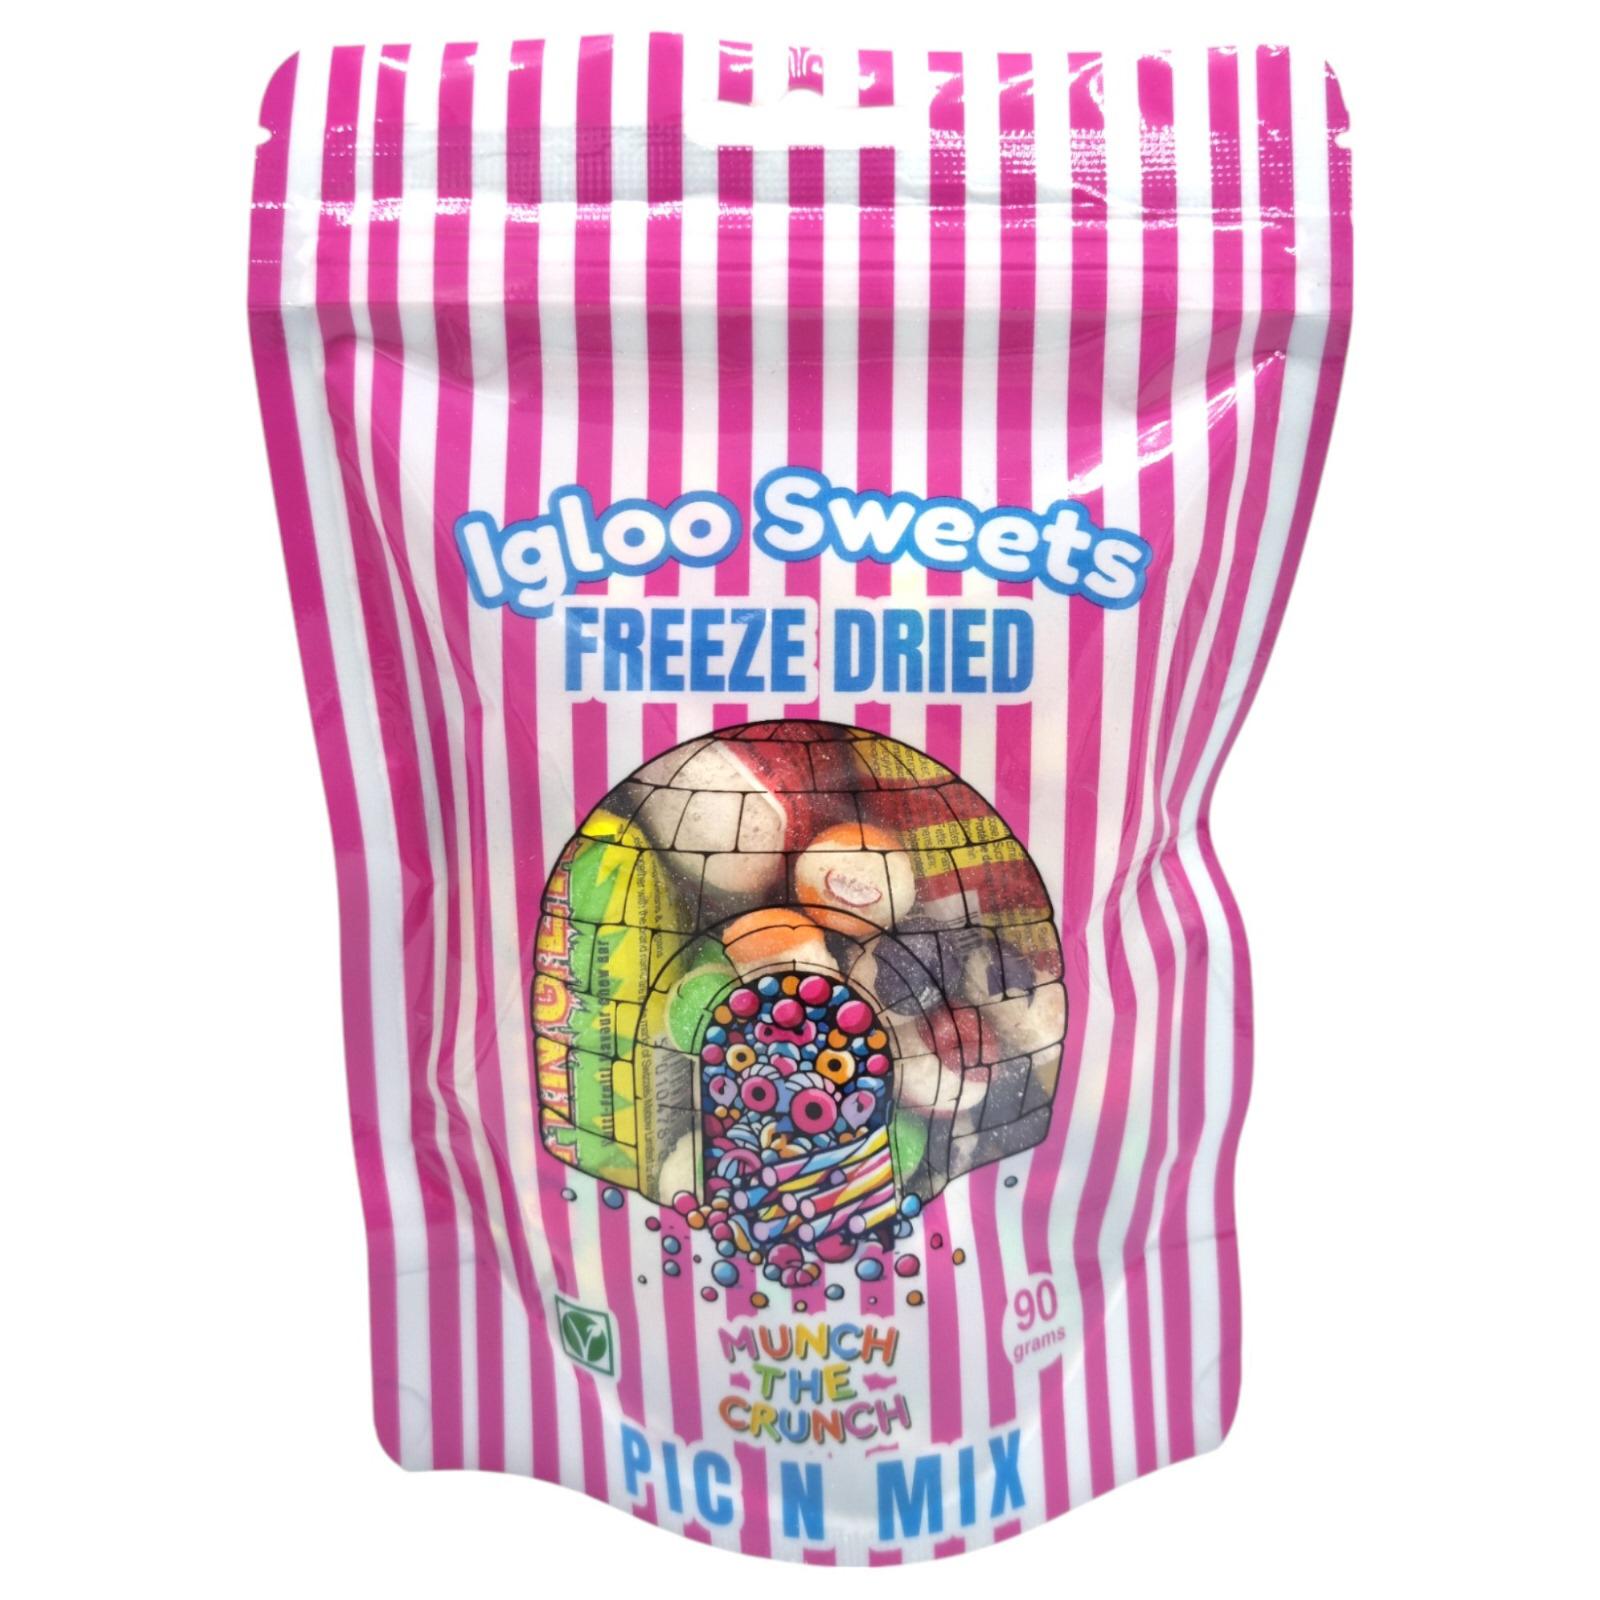 Igloo Sweets Freeze Dried Pink Candy Pick N Mix 90g - 10 Count